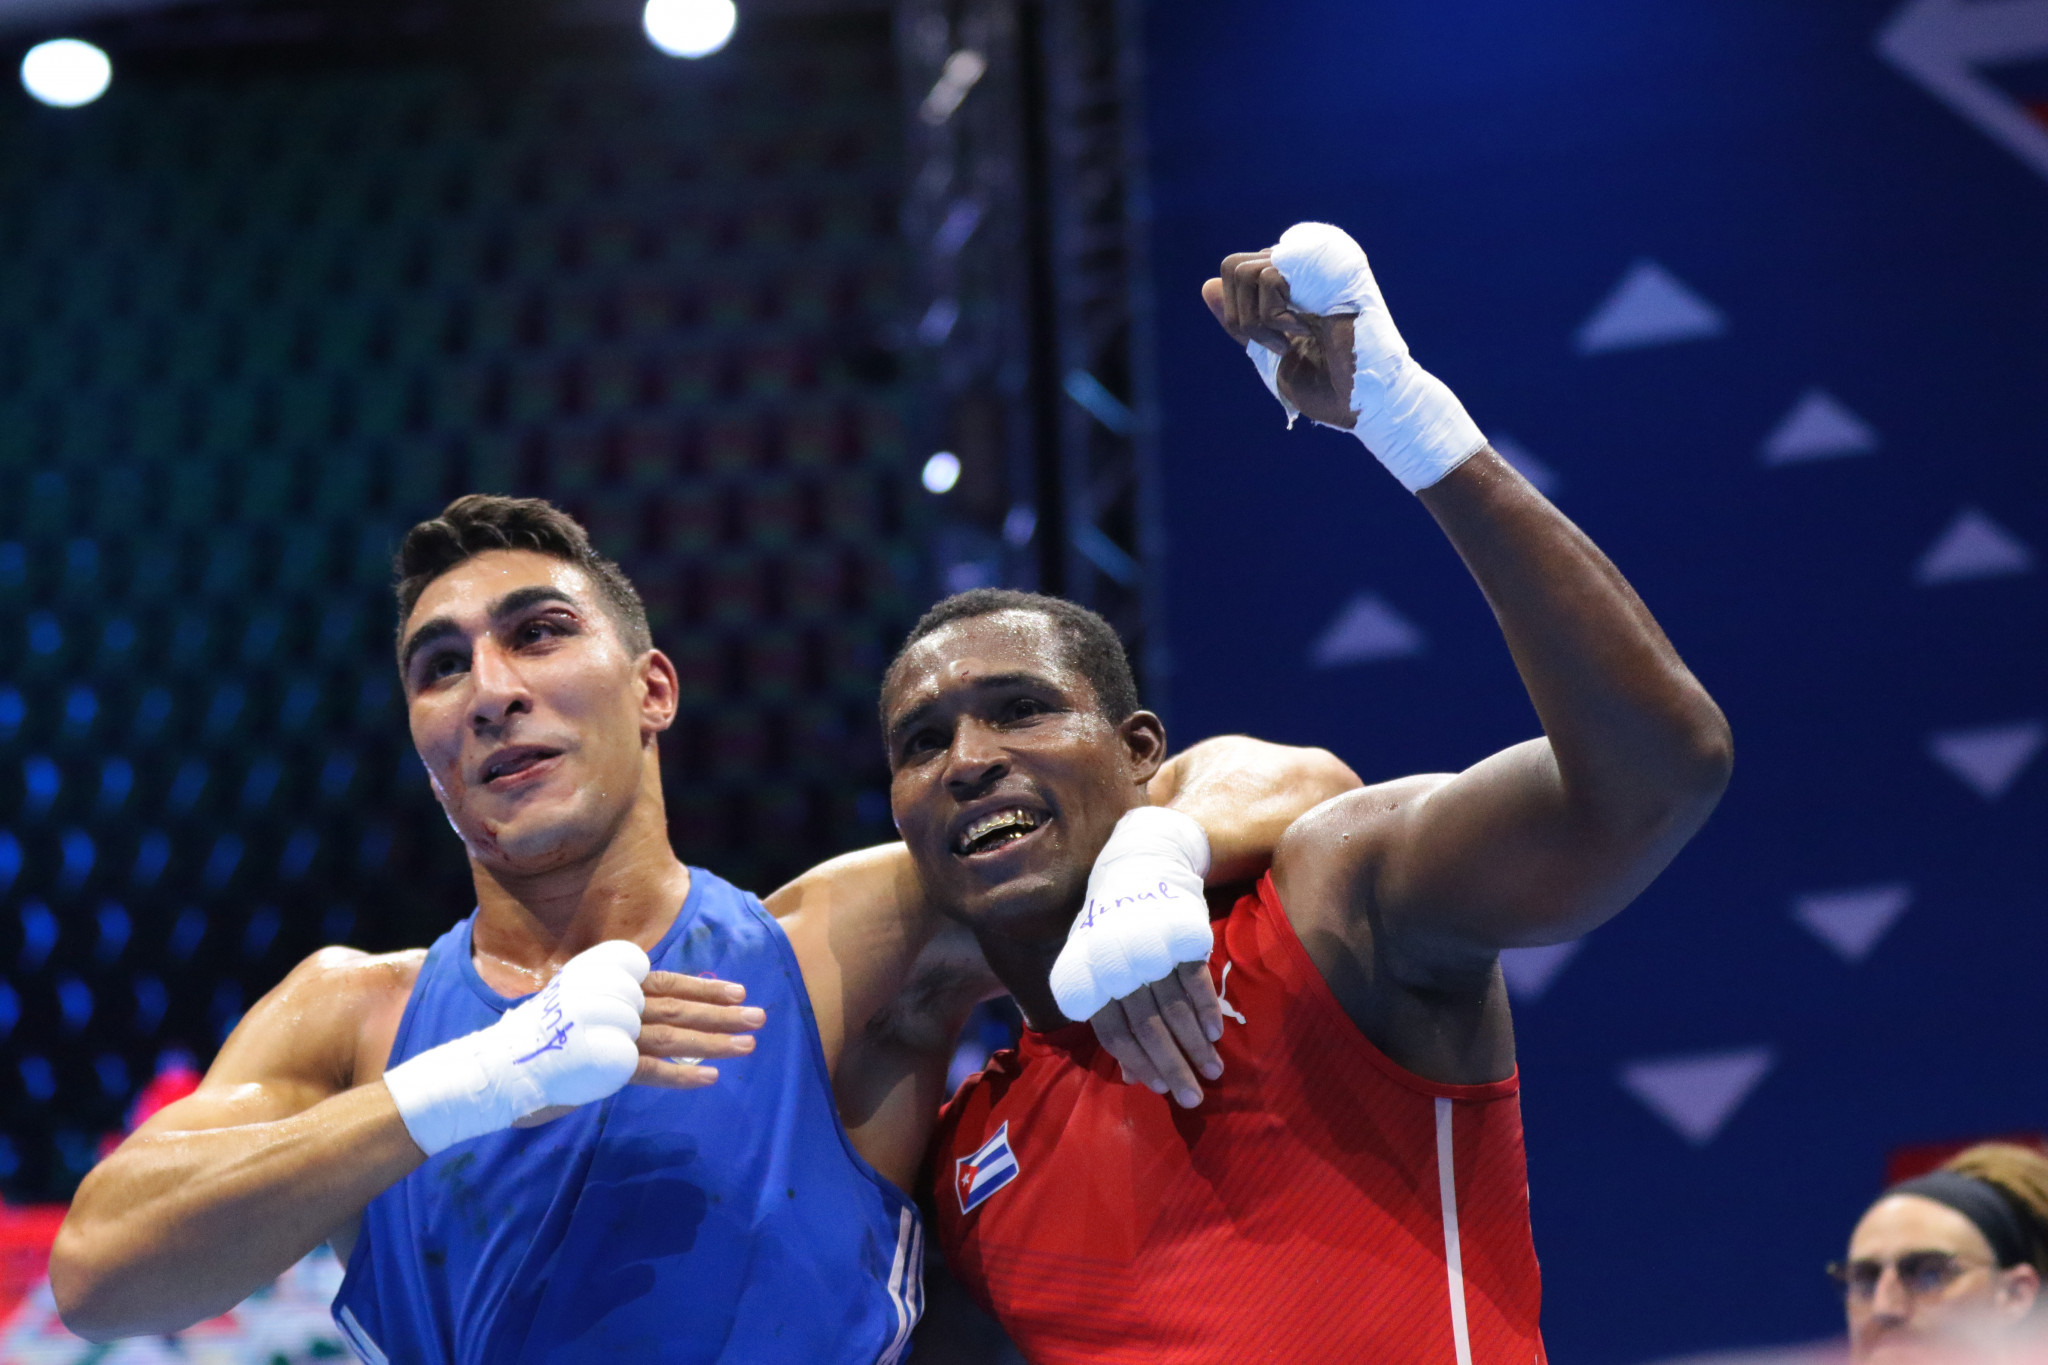 Aziz Abbes Mouhiidine of Italy, left, and Julio La Cruz of Cuba, right, showing a sign of respect after their bout ©Dimitrije Vasiljević 2021